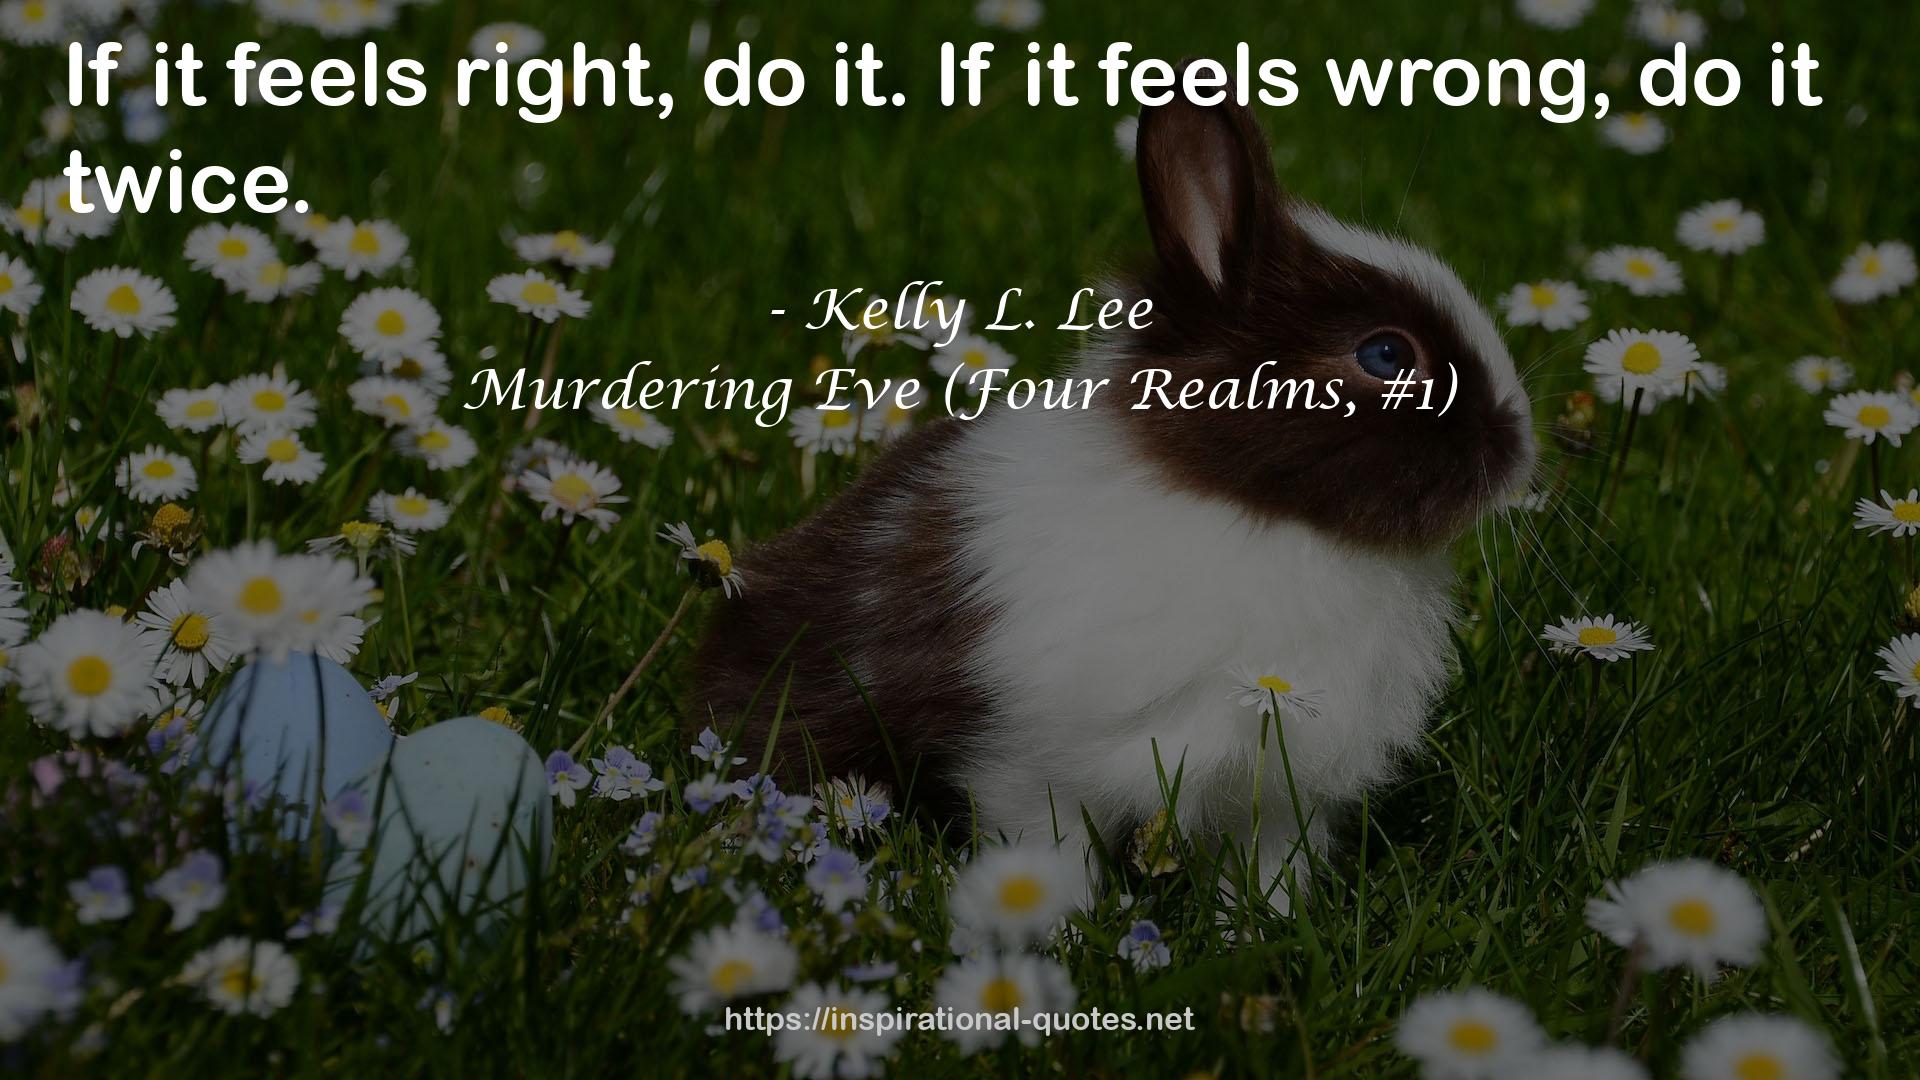 Murdering Eve (Four Realms, #1) QUOTES